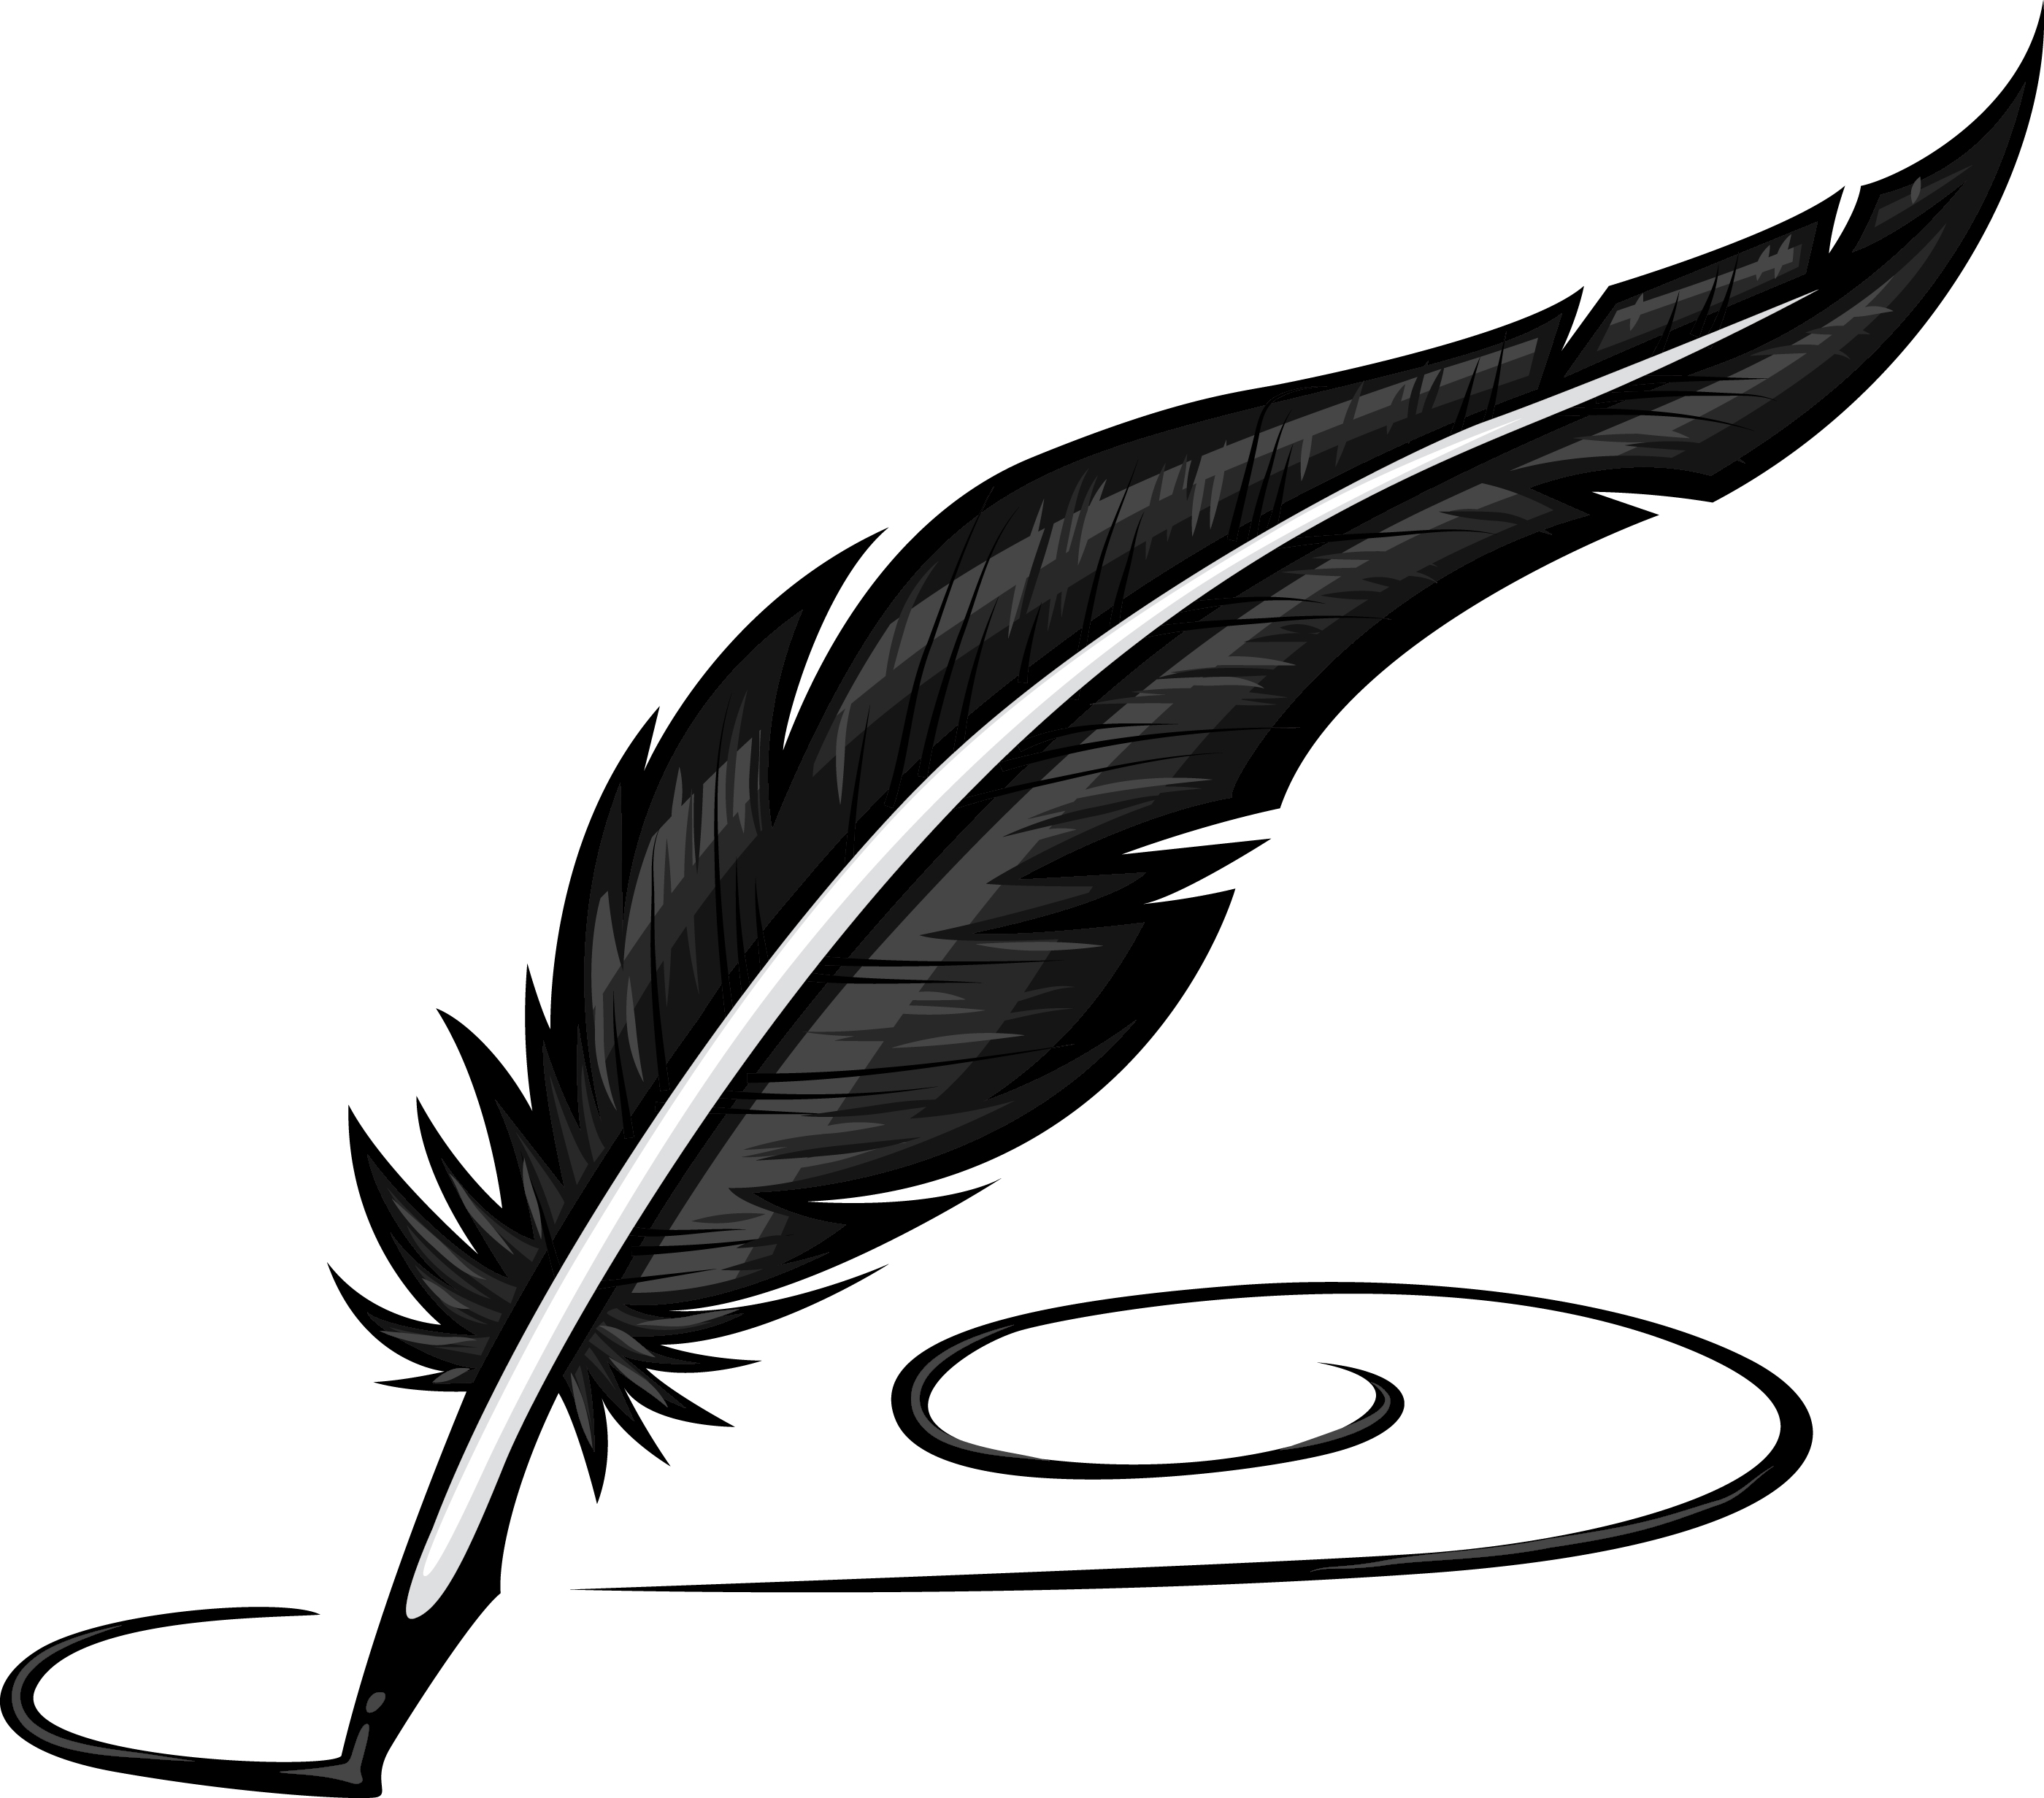 Inkwell With Feather Pen Vector Image Clipart